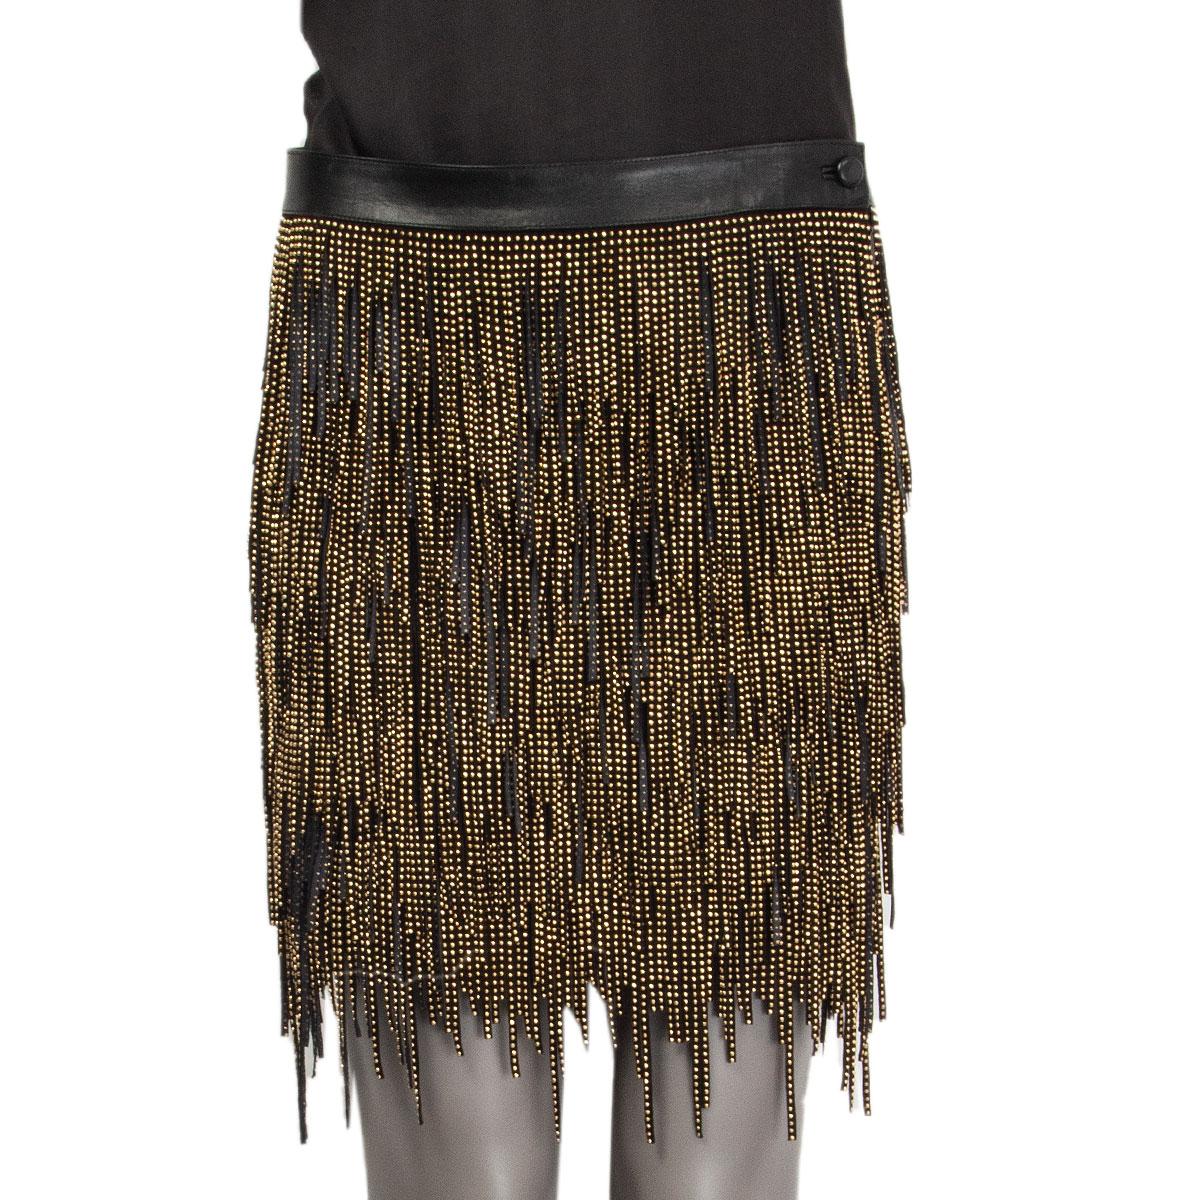 authentic Saint Laurent fringe skirt in black lambskin (100%) with small golden heavy beads. Closes with one button and a zipper on the side. Lined in black silk (100%). Has been worn and is in excellent condition.

Tag Size 36
Size XS
Waist 80cm